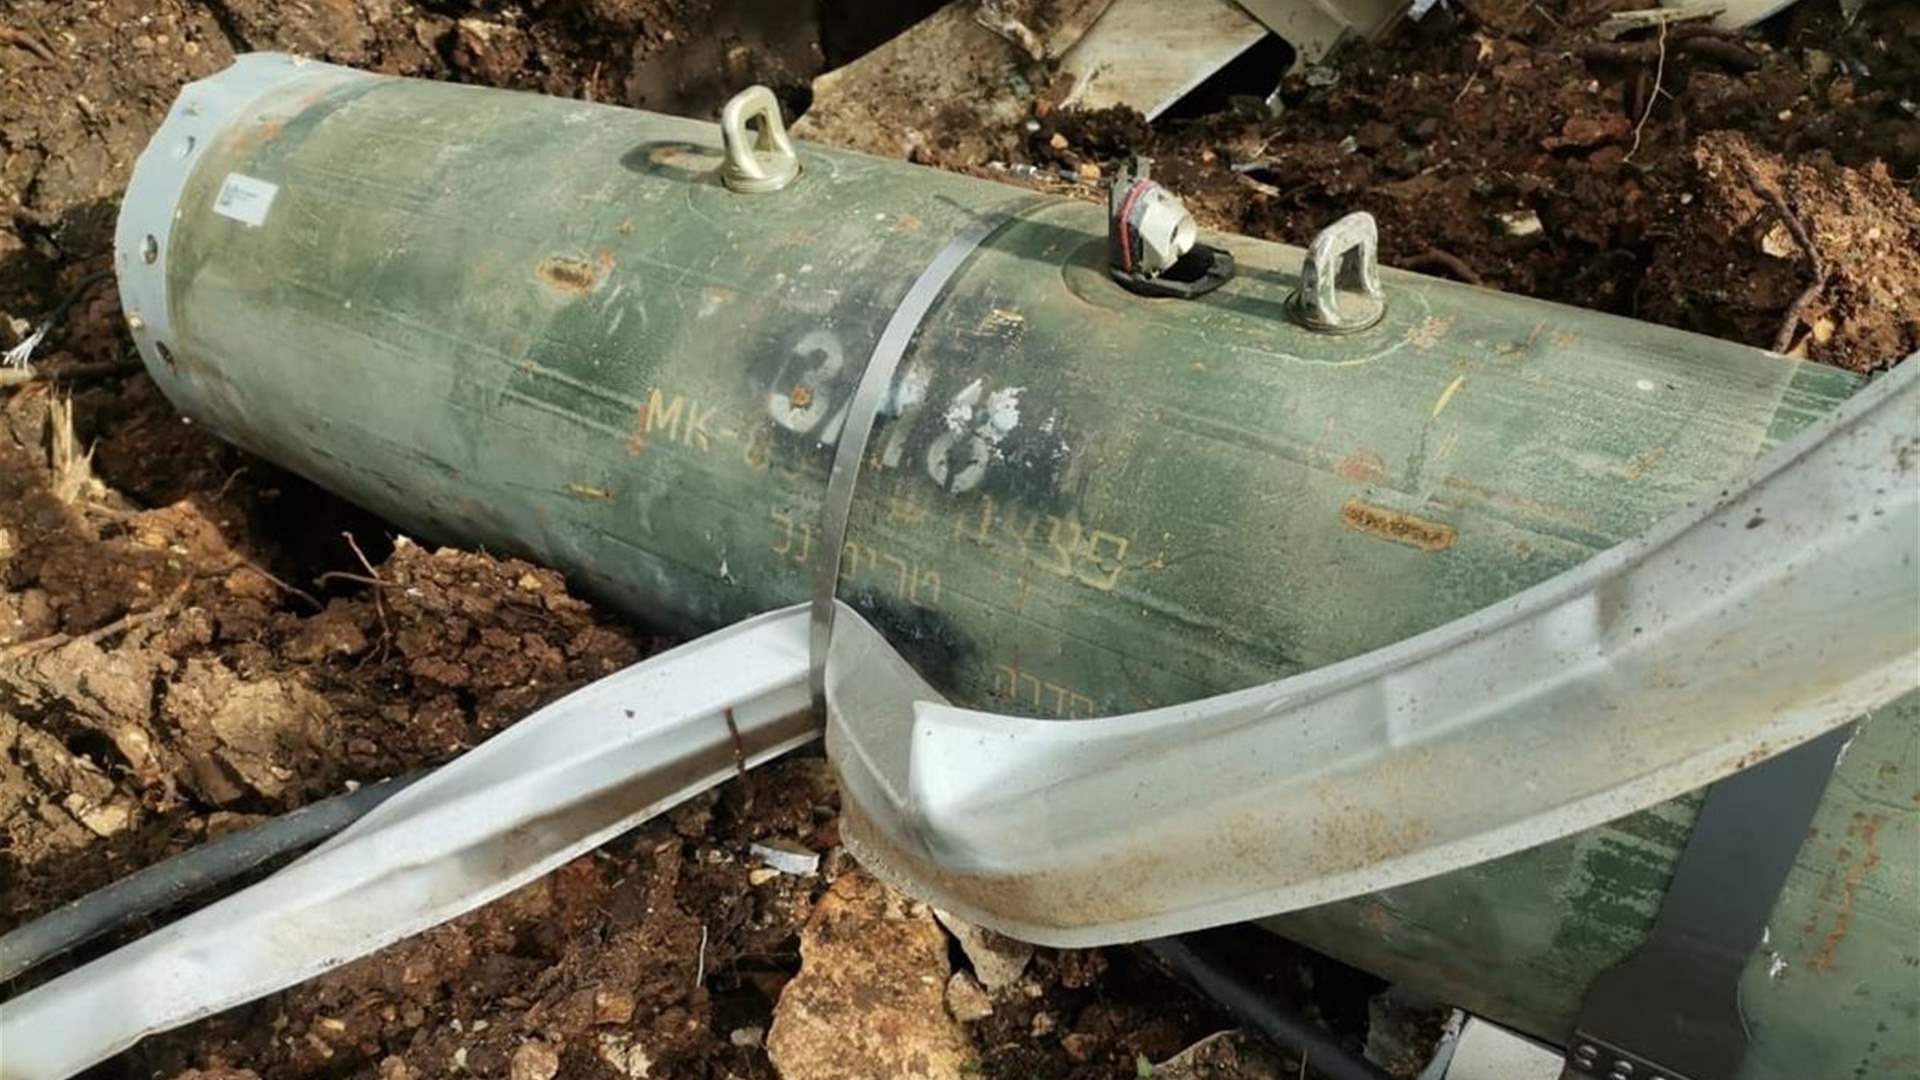 Lebanese army responds to discovery of unexploded Israeli missile in Habchit outskirts